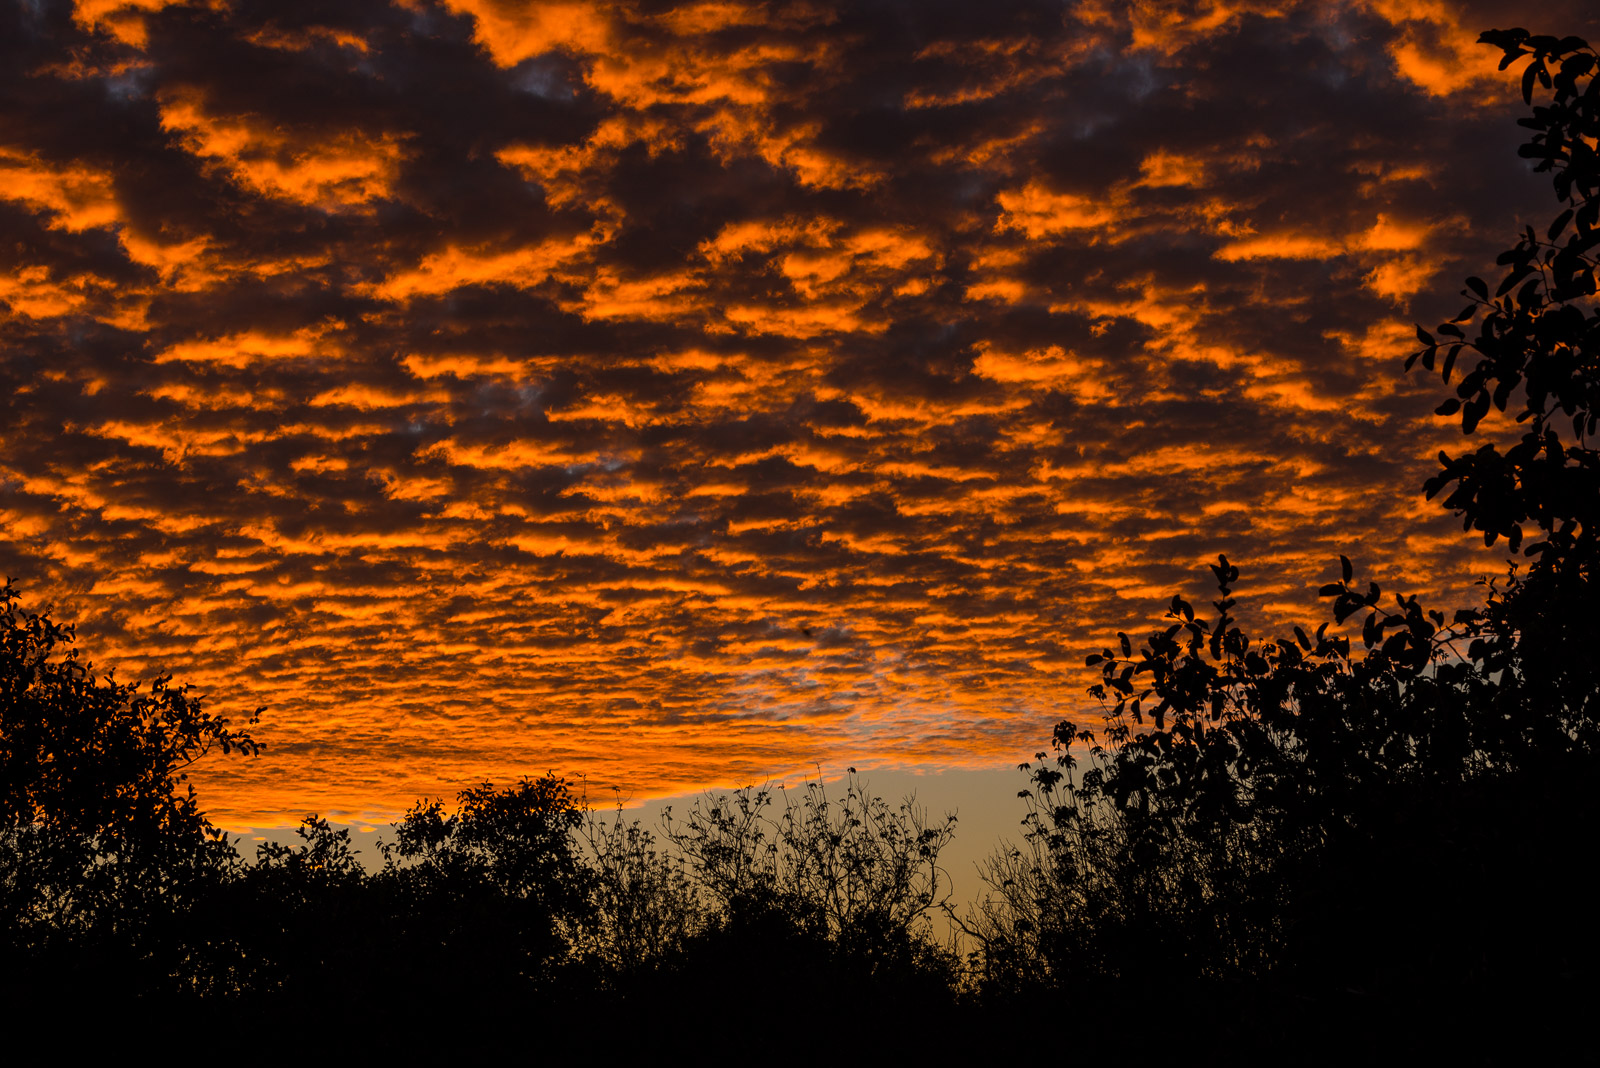 The sky lights up with a vivid red in the Savuti Region of Chobe National Park, Botswana.